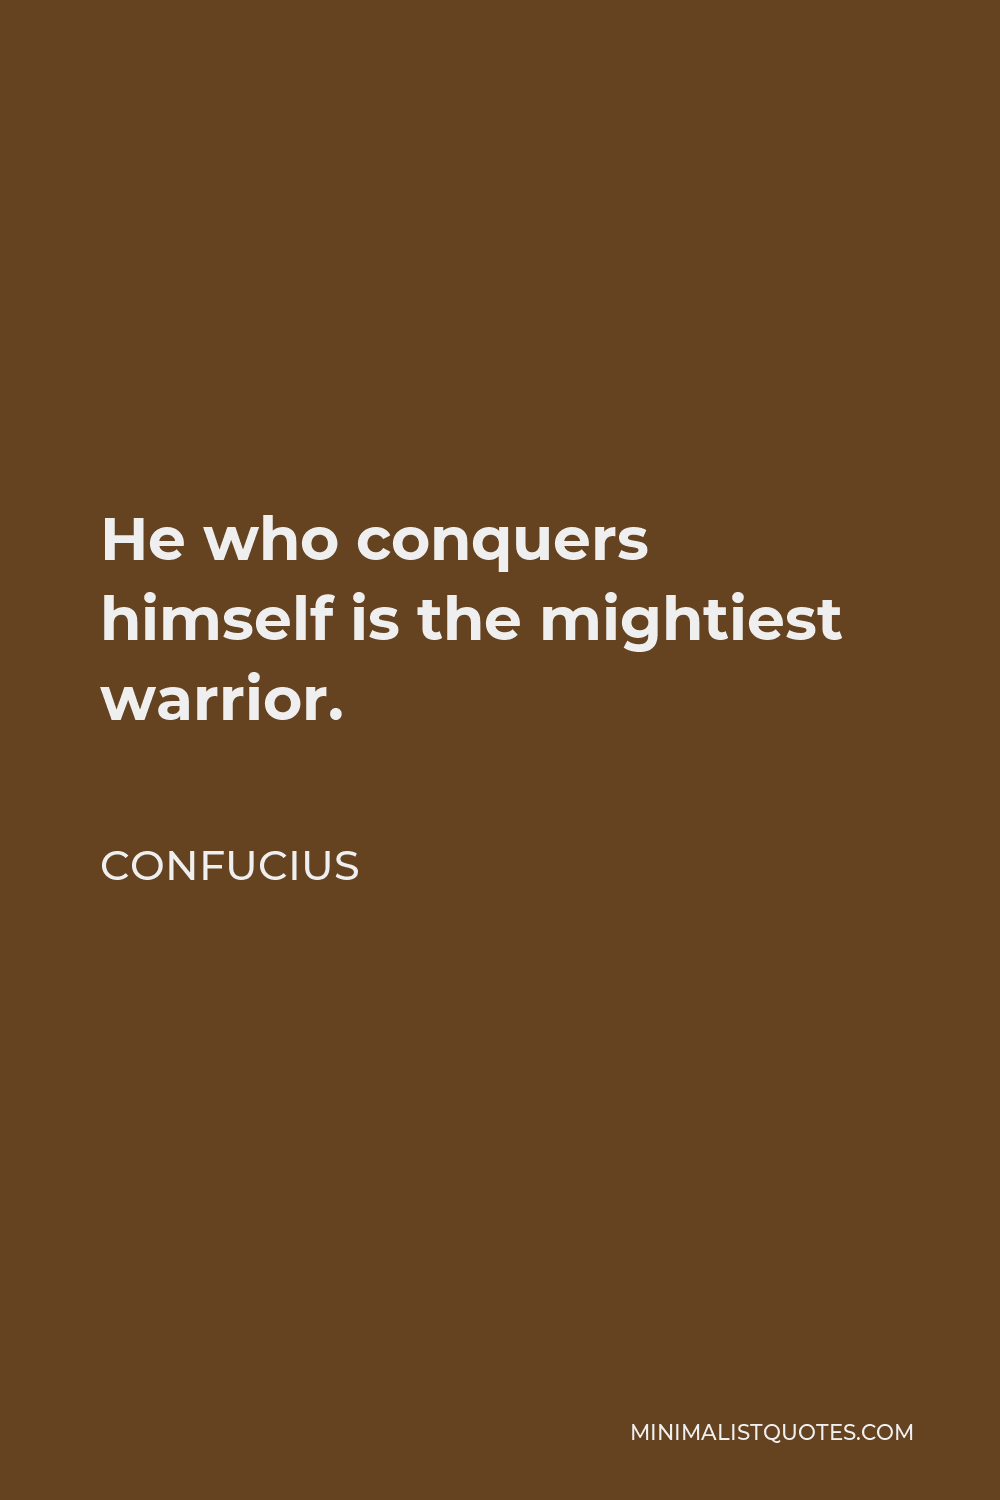 Confucius Quote - He who conquers himself is the mightiest warrior.